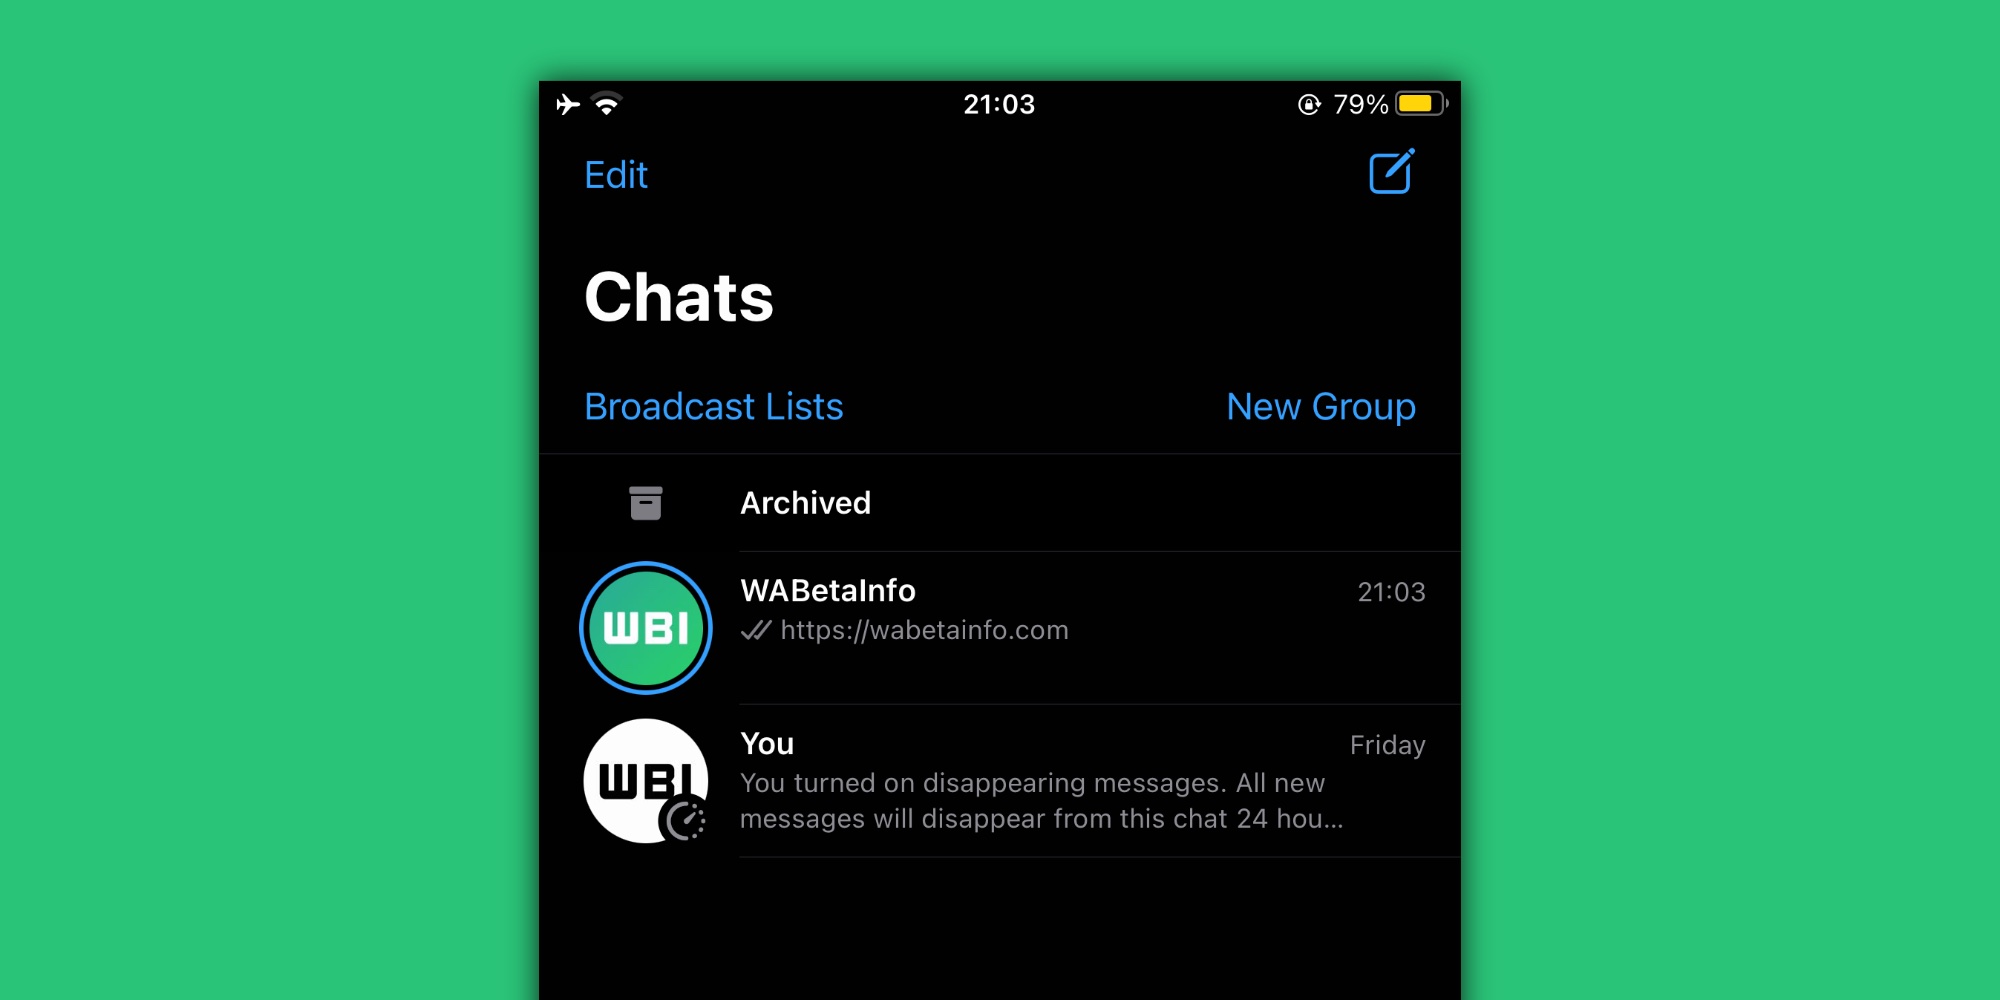 WhatsApp for iOS plans to bring Stories-like feature to the chat list